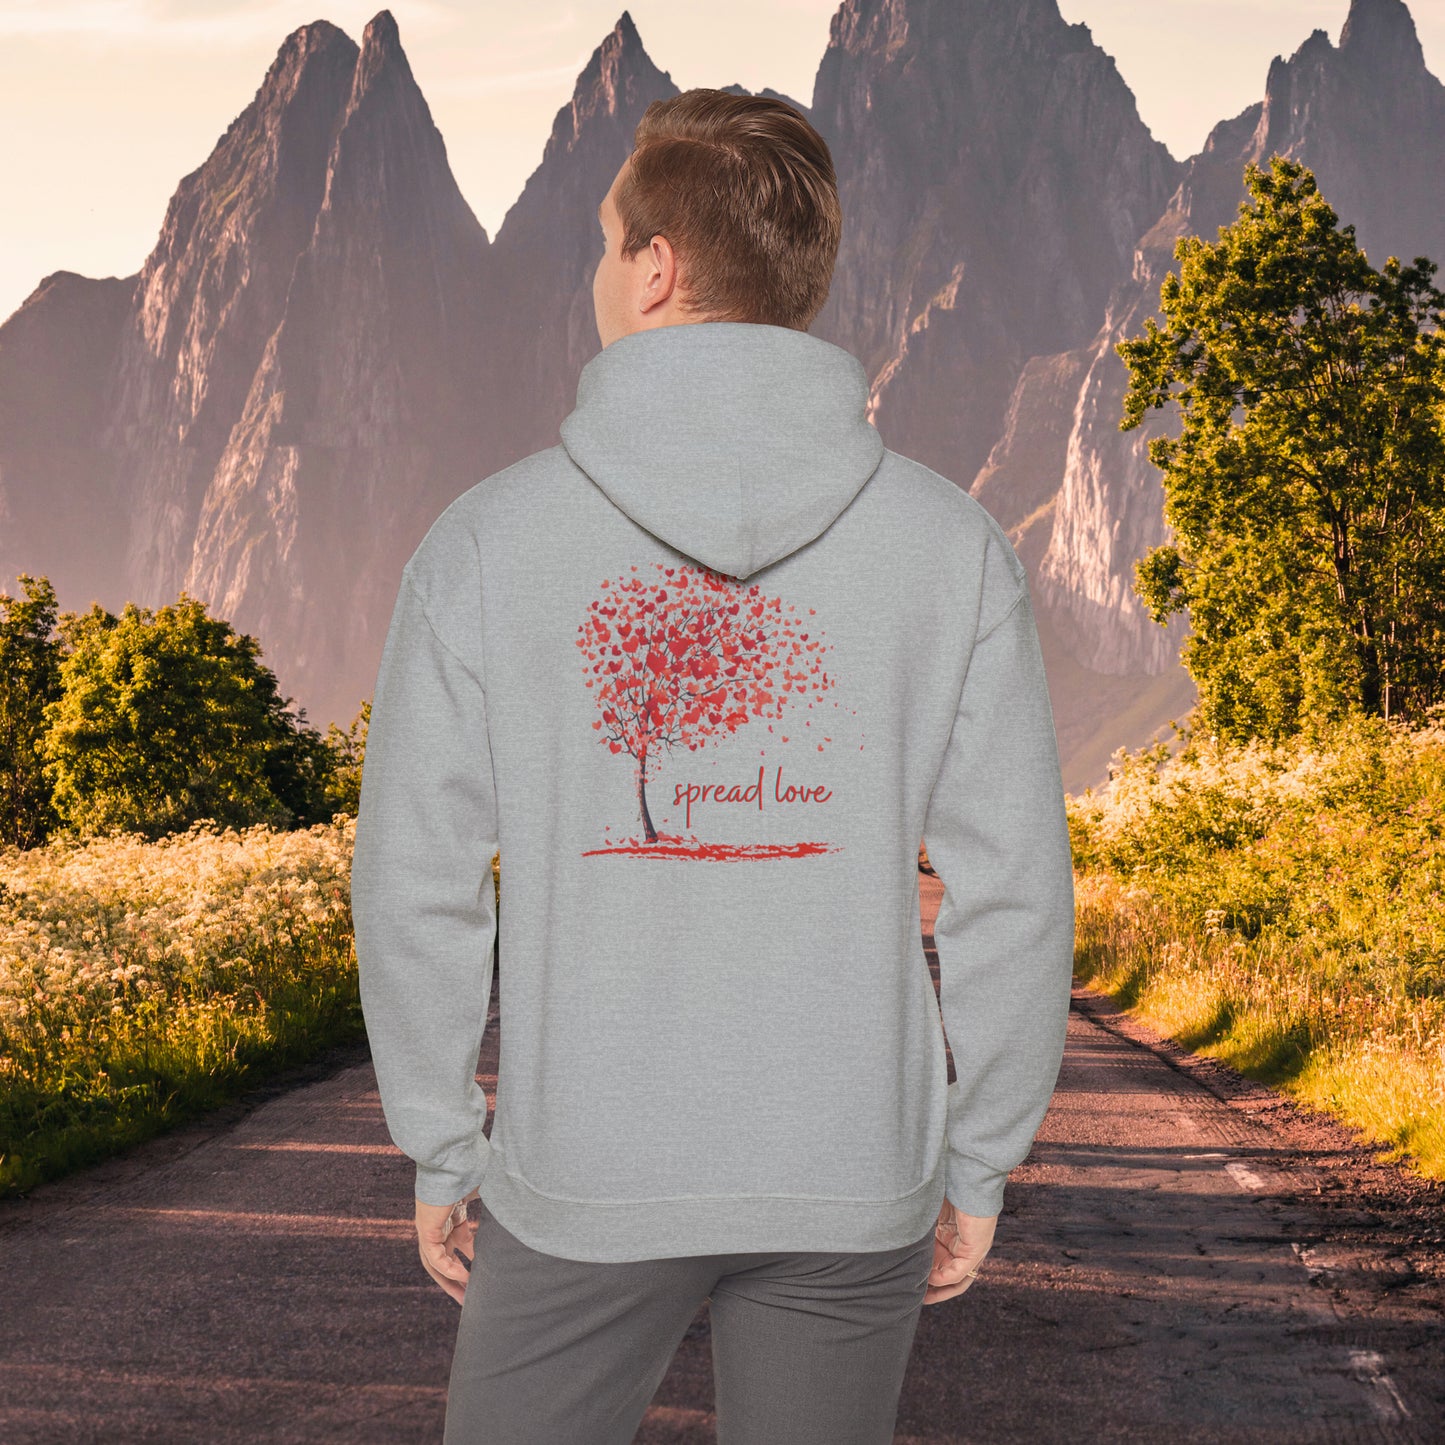 Spread love is the message on this heart filled tree designed Unisex Heavy Blend™ Hooded Sweatshirt